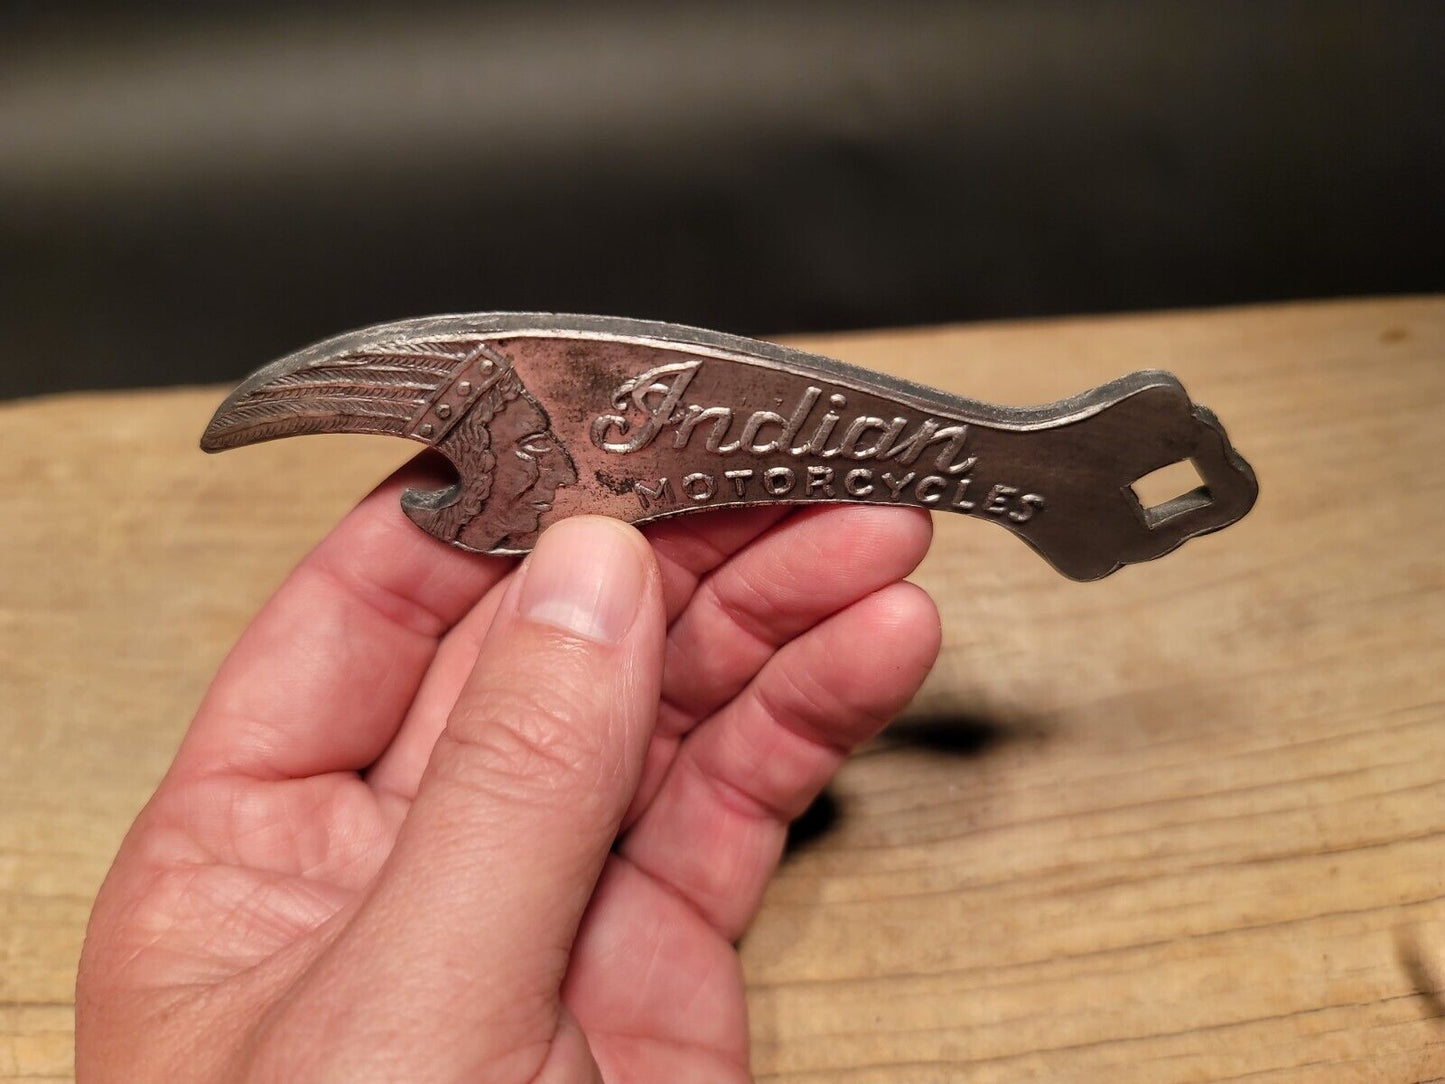 Vintage Antique Style "Indian Motorcycles" Bottle Opener